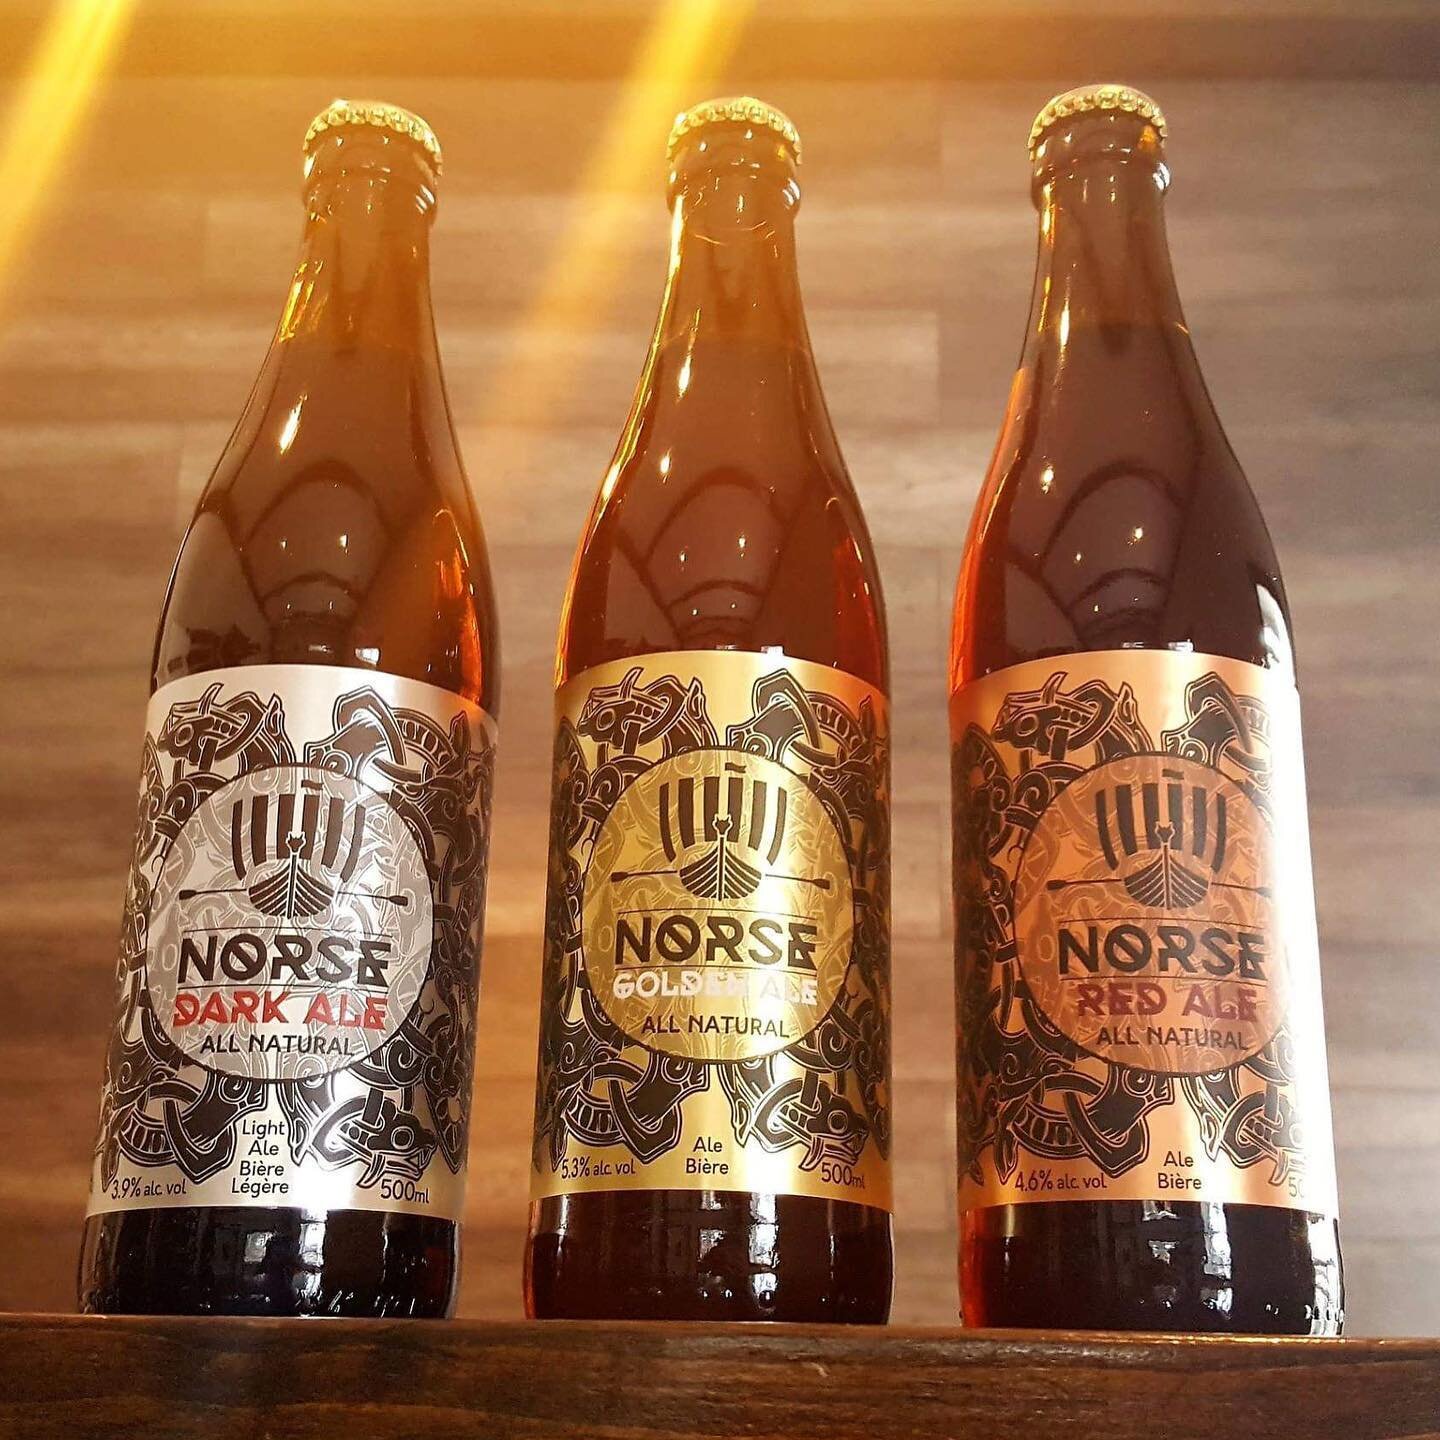 The bottle trio. Really enjoyed working on Norse&rsquo;s branding and labels - glad to see the world is wisening up to remote work. Sure it has its difficulties. But worth it for the pro&rsquo;s.  @norsebrewery really great team to work with too.